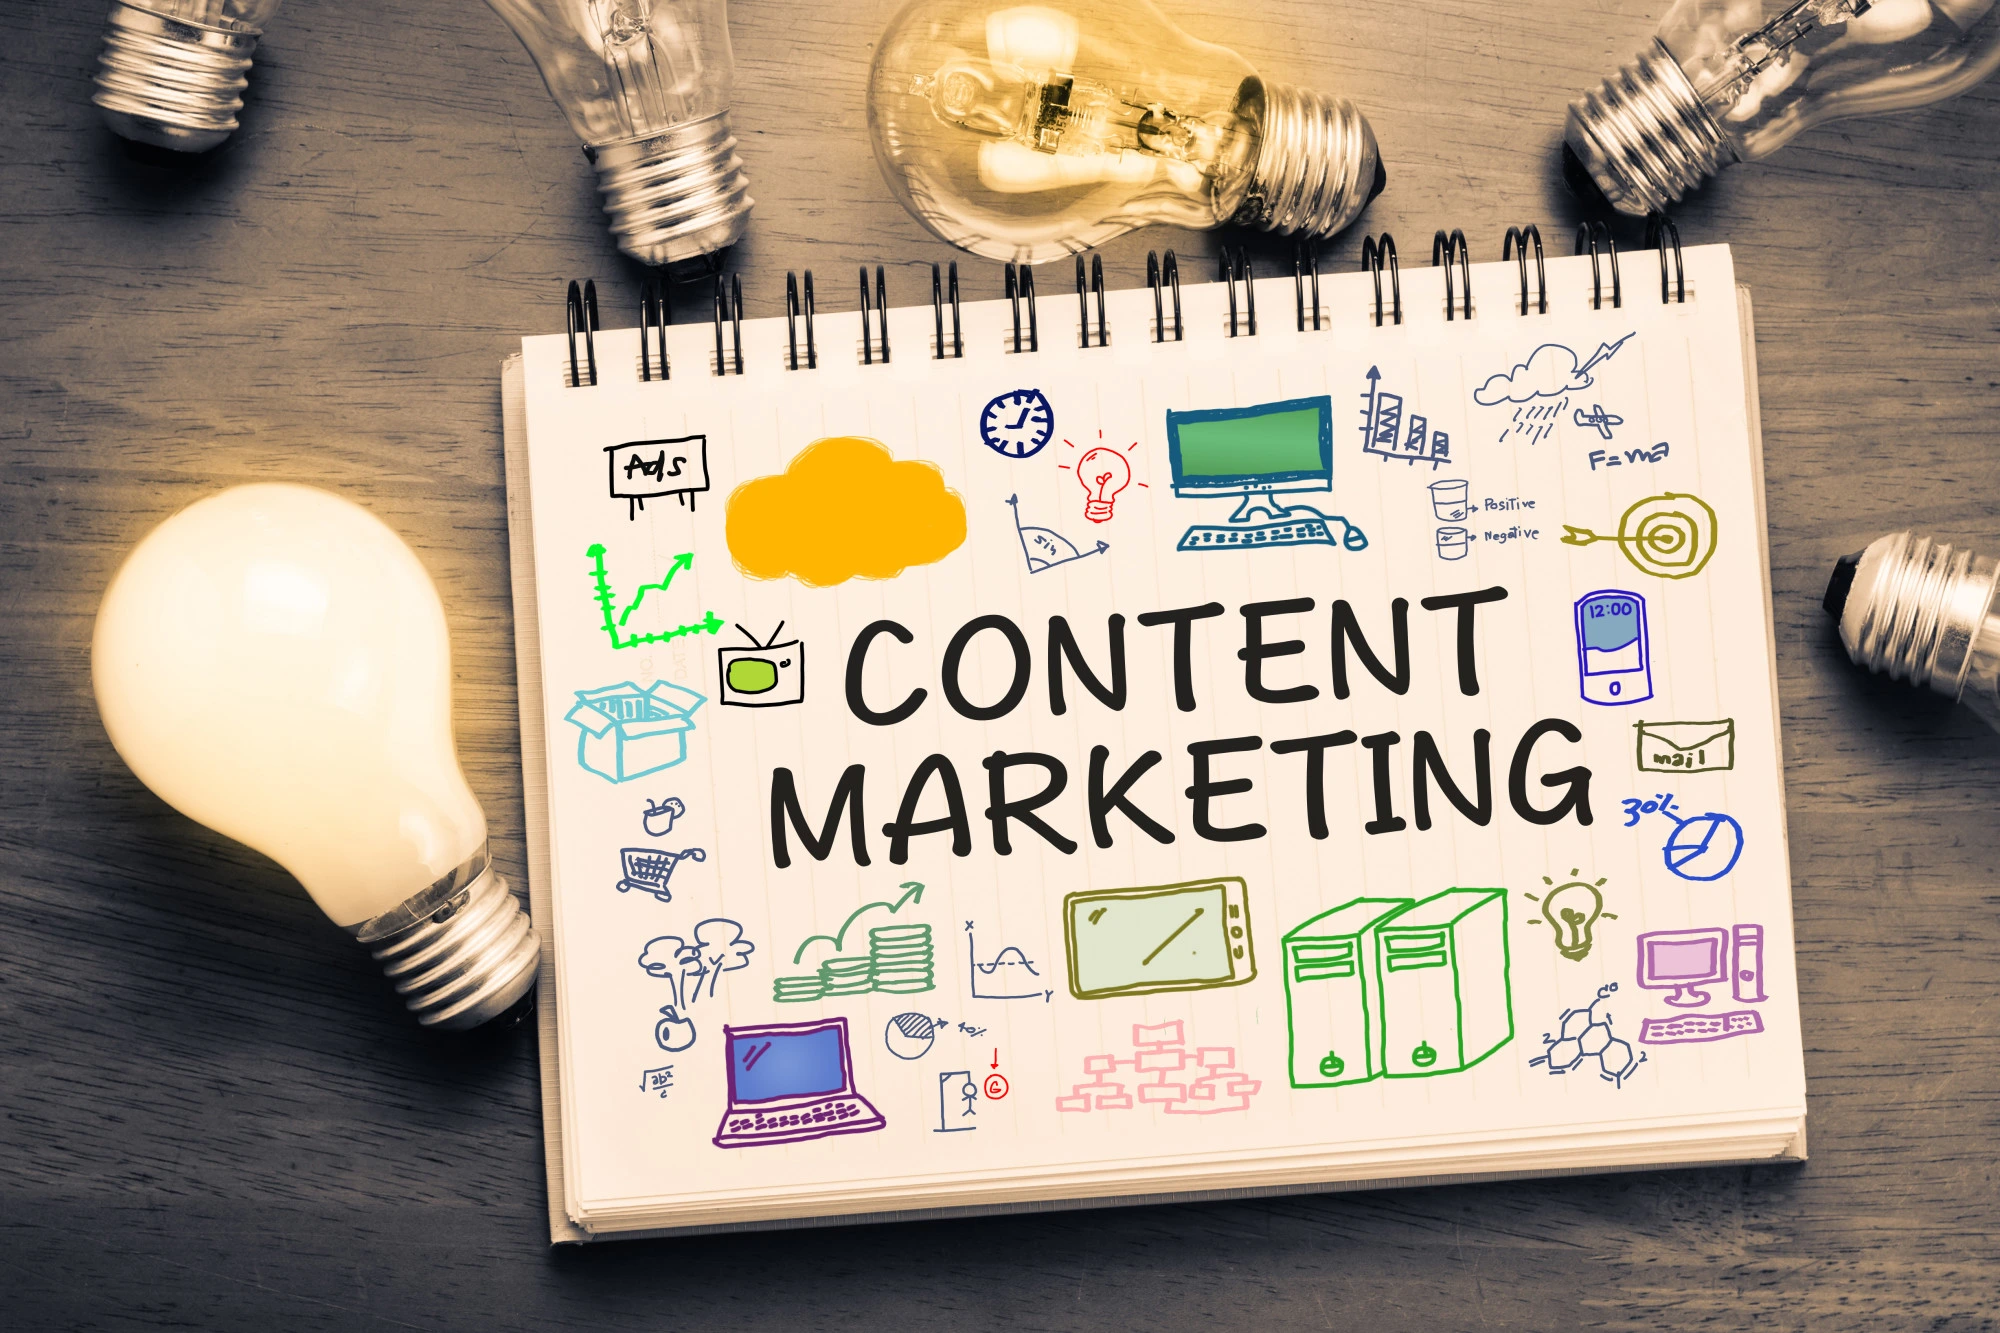 Content Marketing Services In Denver